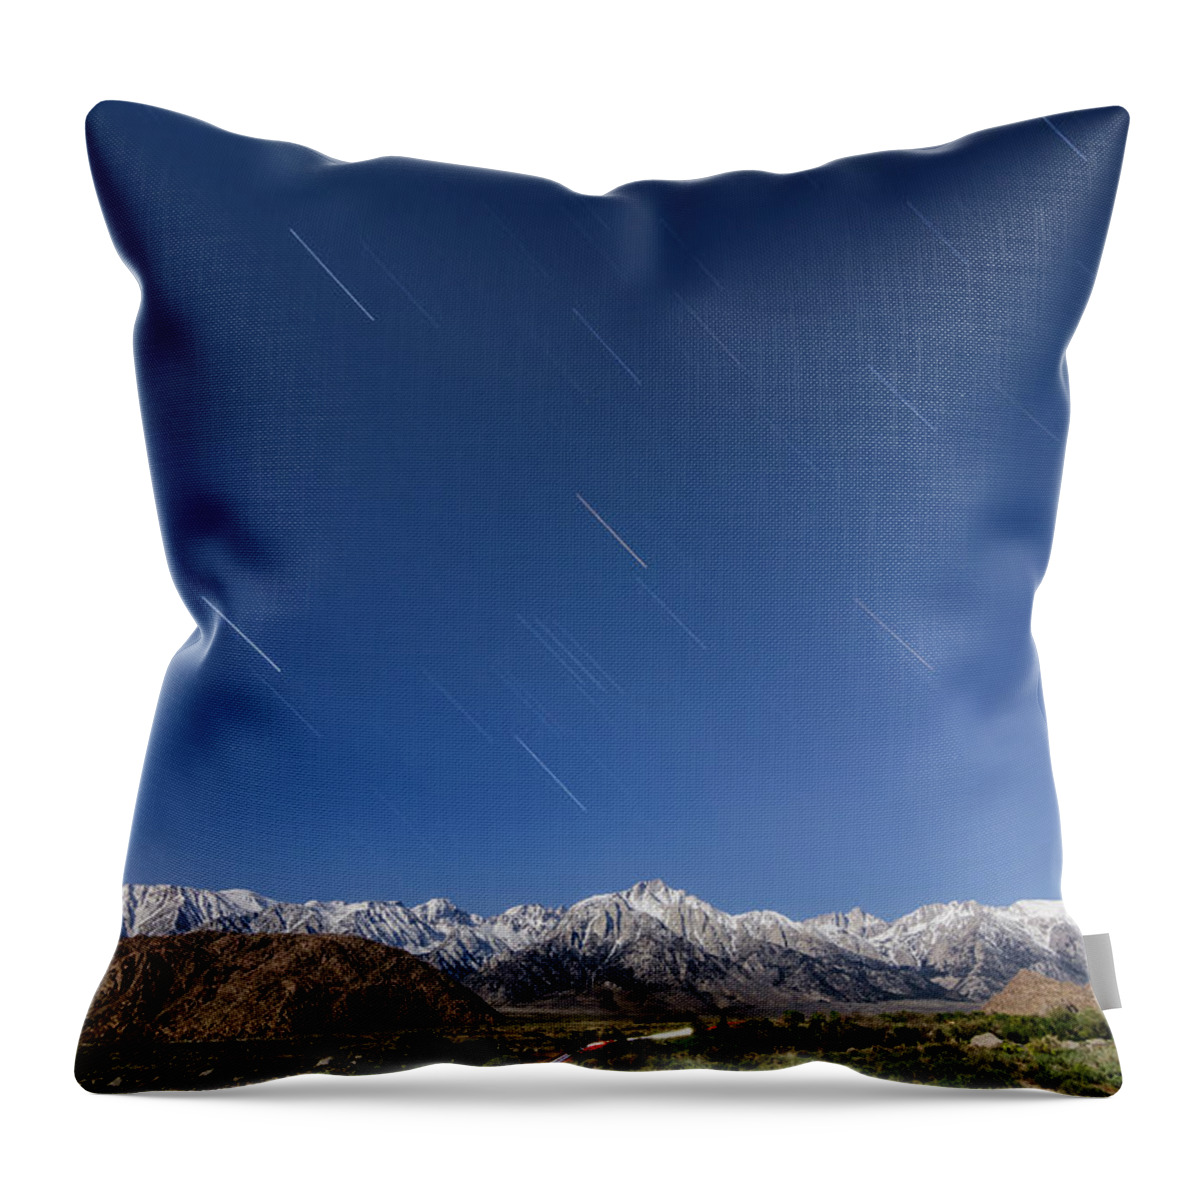 California Throw Pillow featuring the photograph It's Raining Stars by Margaret Pitcher